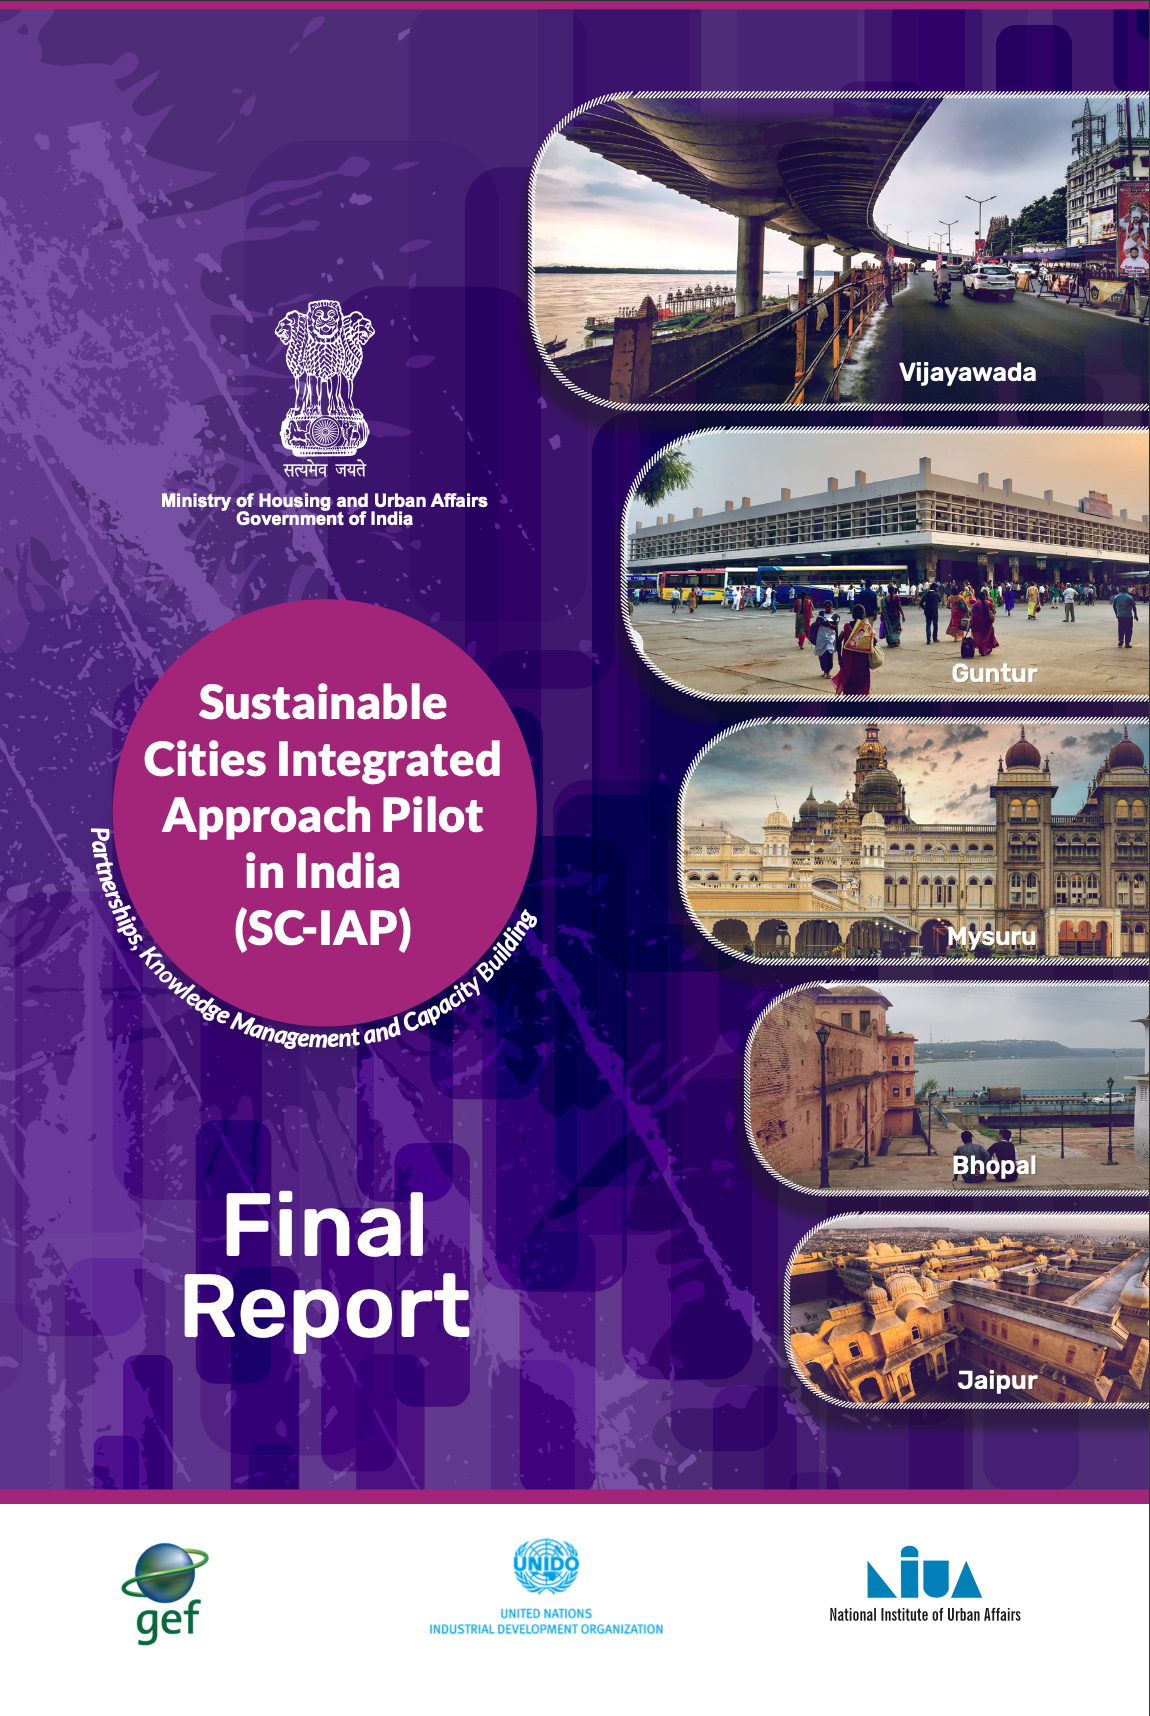 Sustainable Cities Integrated Approach Pilot in India (SC-IAP)